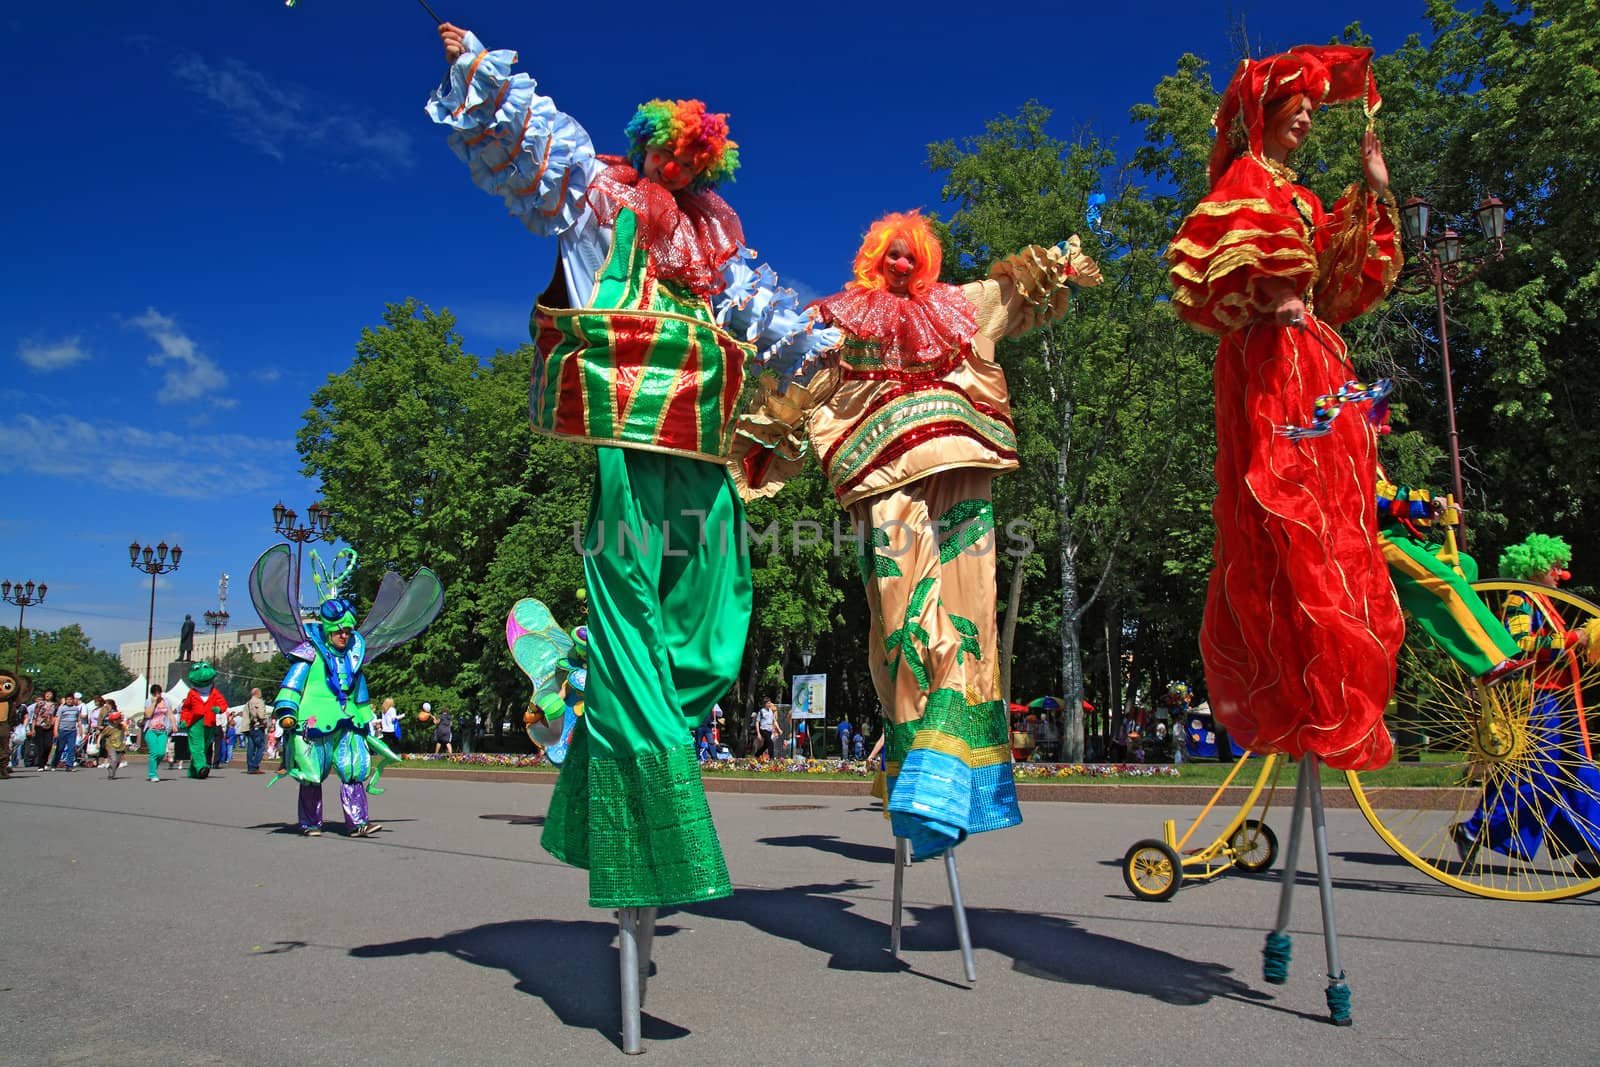 VELIKIJ NOVGOROD, RUSSIA - JUNE 10: clowns on town street at day by basel101658